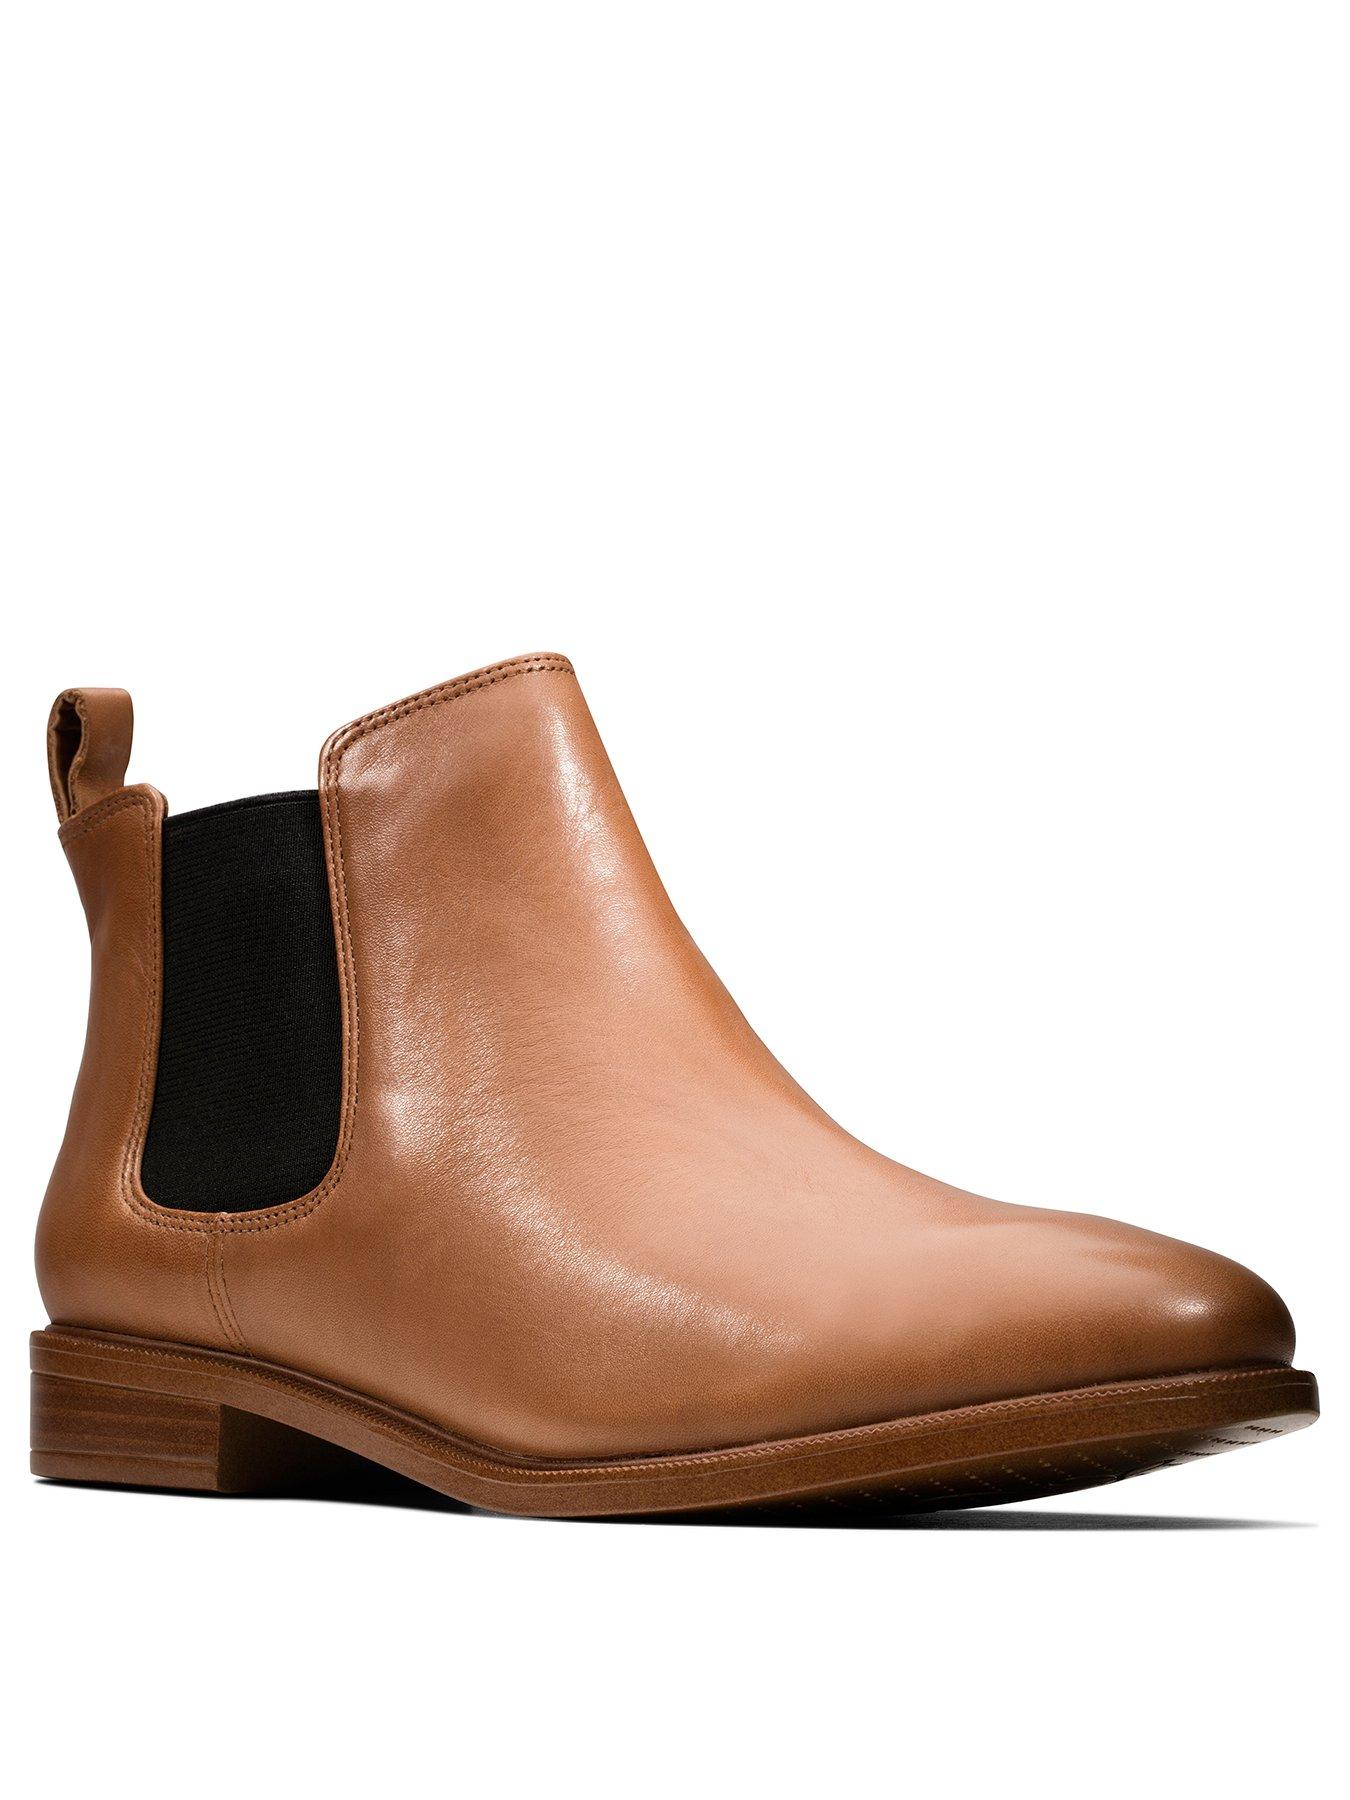 clarks womens brown ankle boots